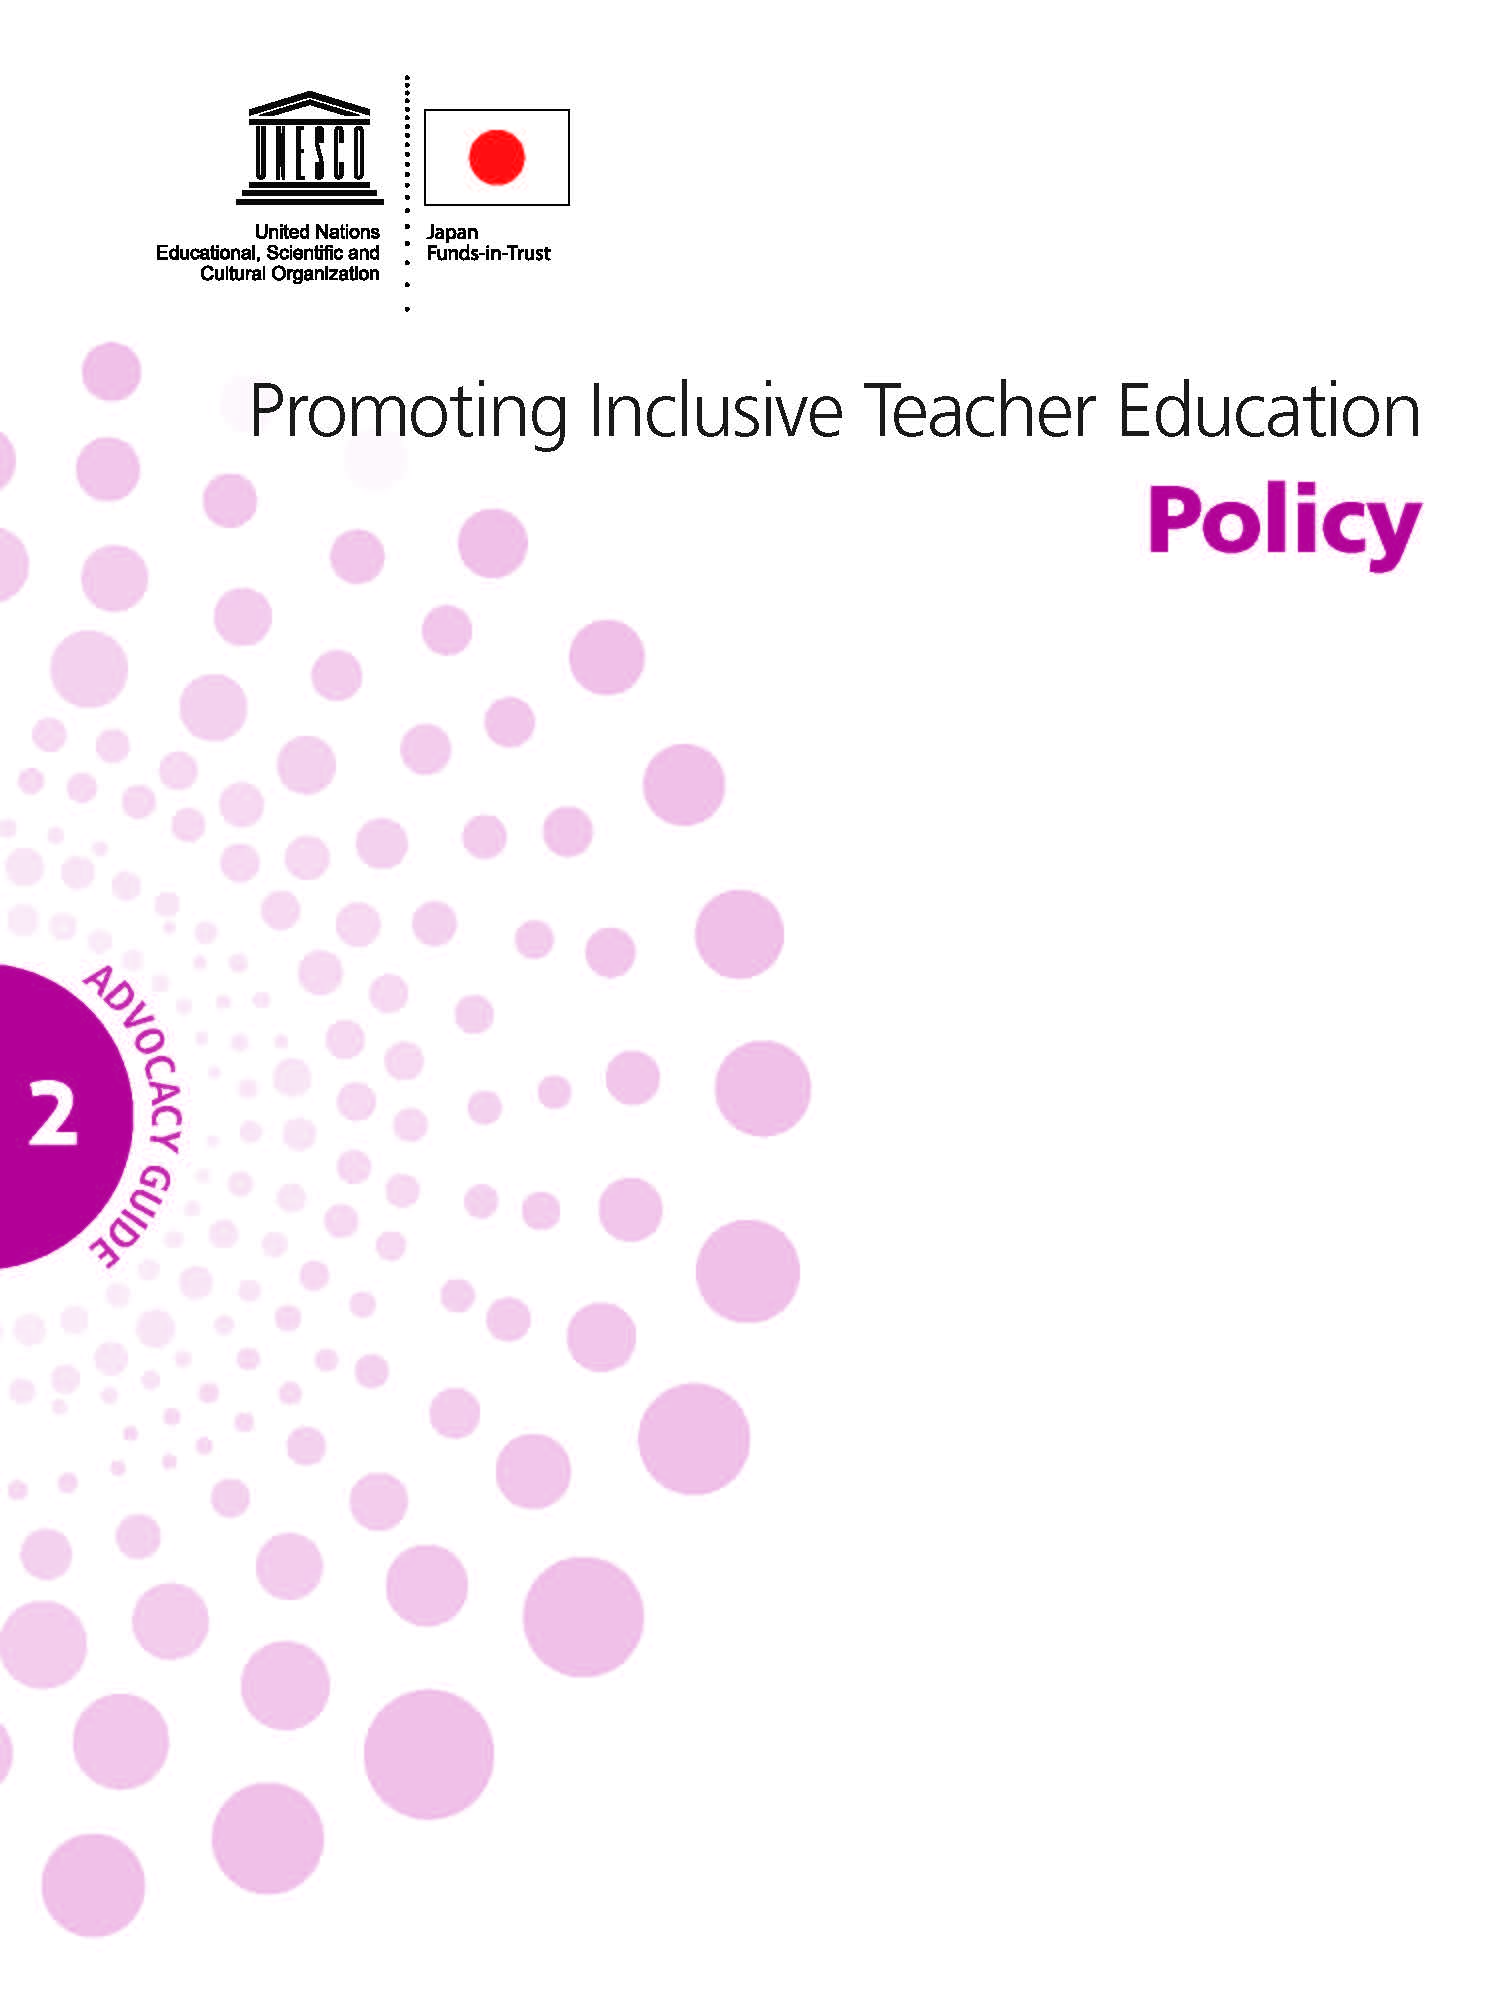 Promoting Inclusive Teacher Education Policy